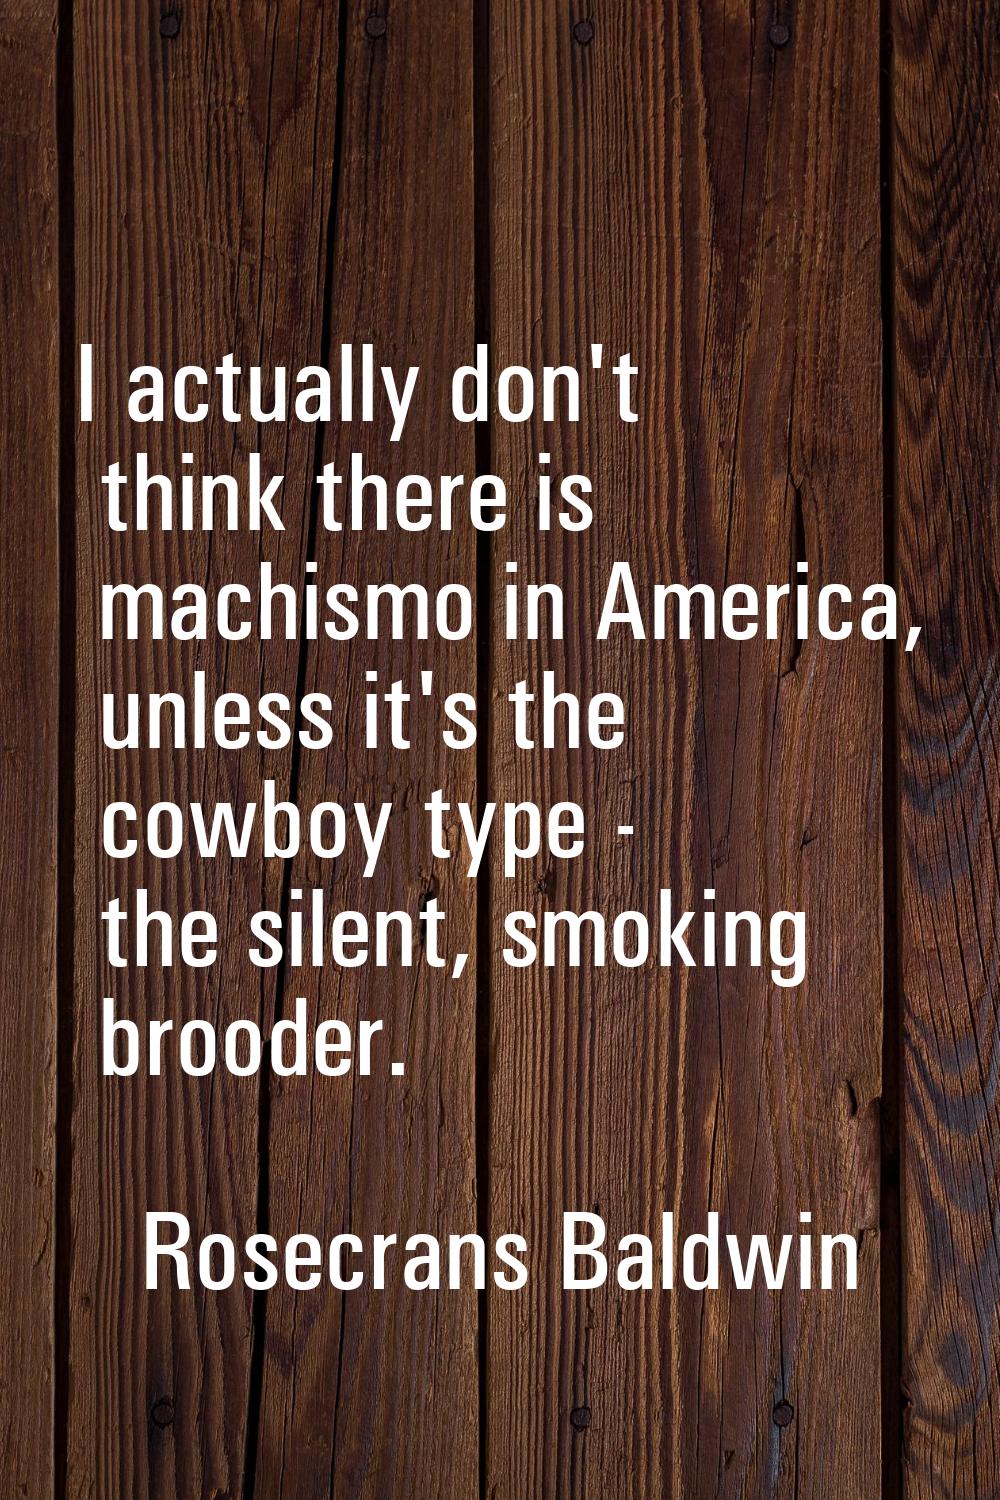 I actually don't think there is machismo in America, unless it's the cowboy type - the silent, smok